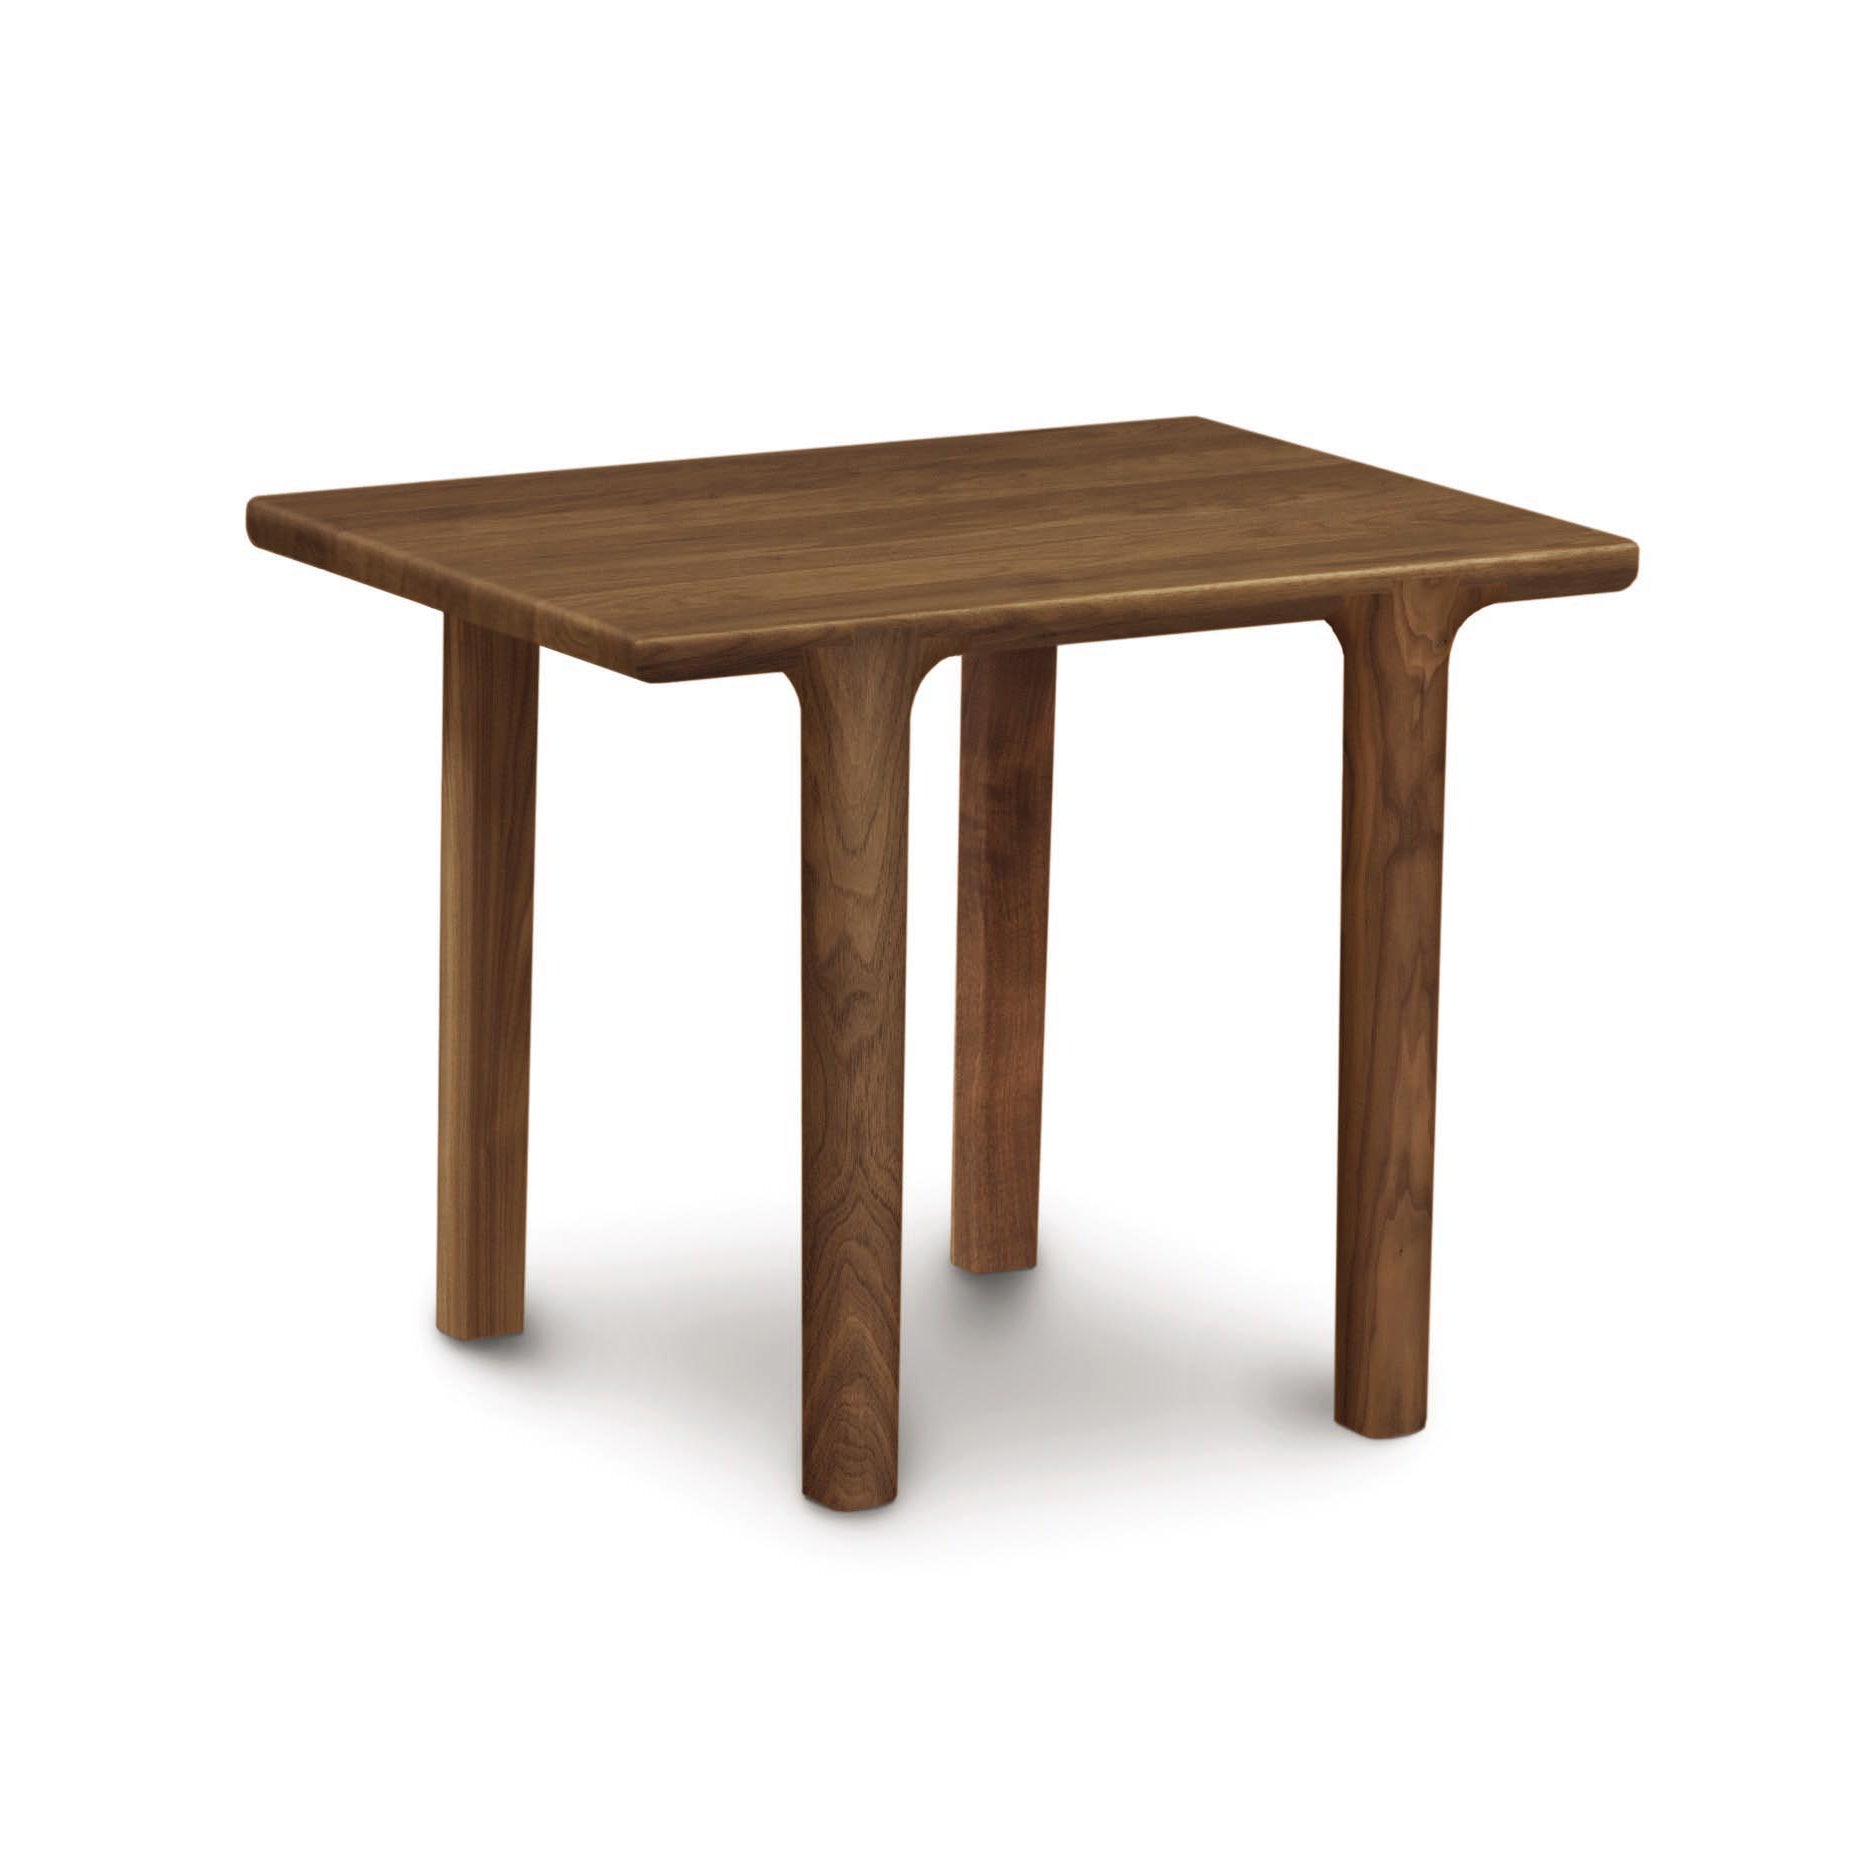 A simple Copeland Furniture Sierra Rectangular End Table made of North American hardwood with four legs on a white background.